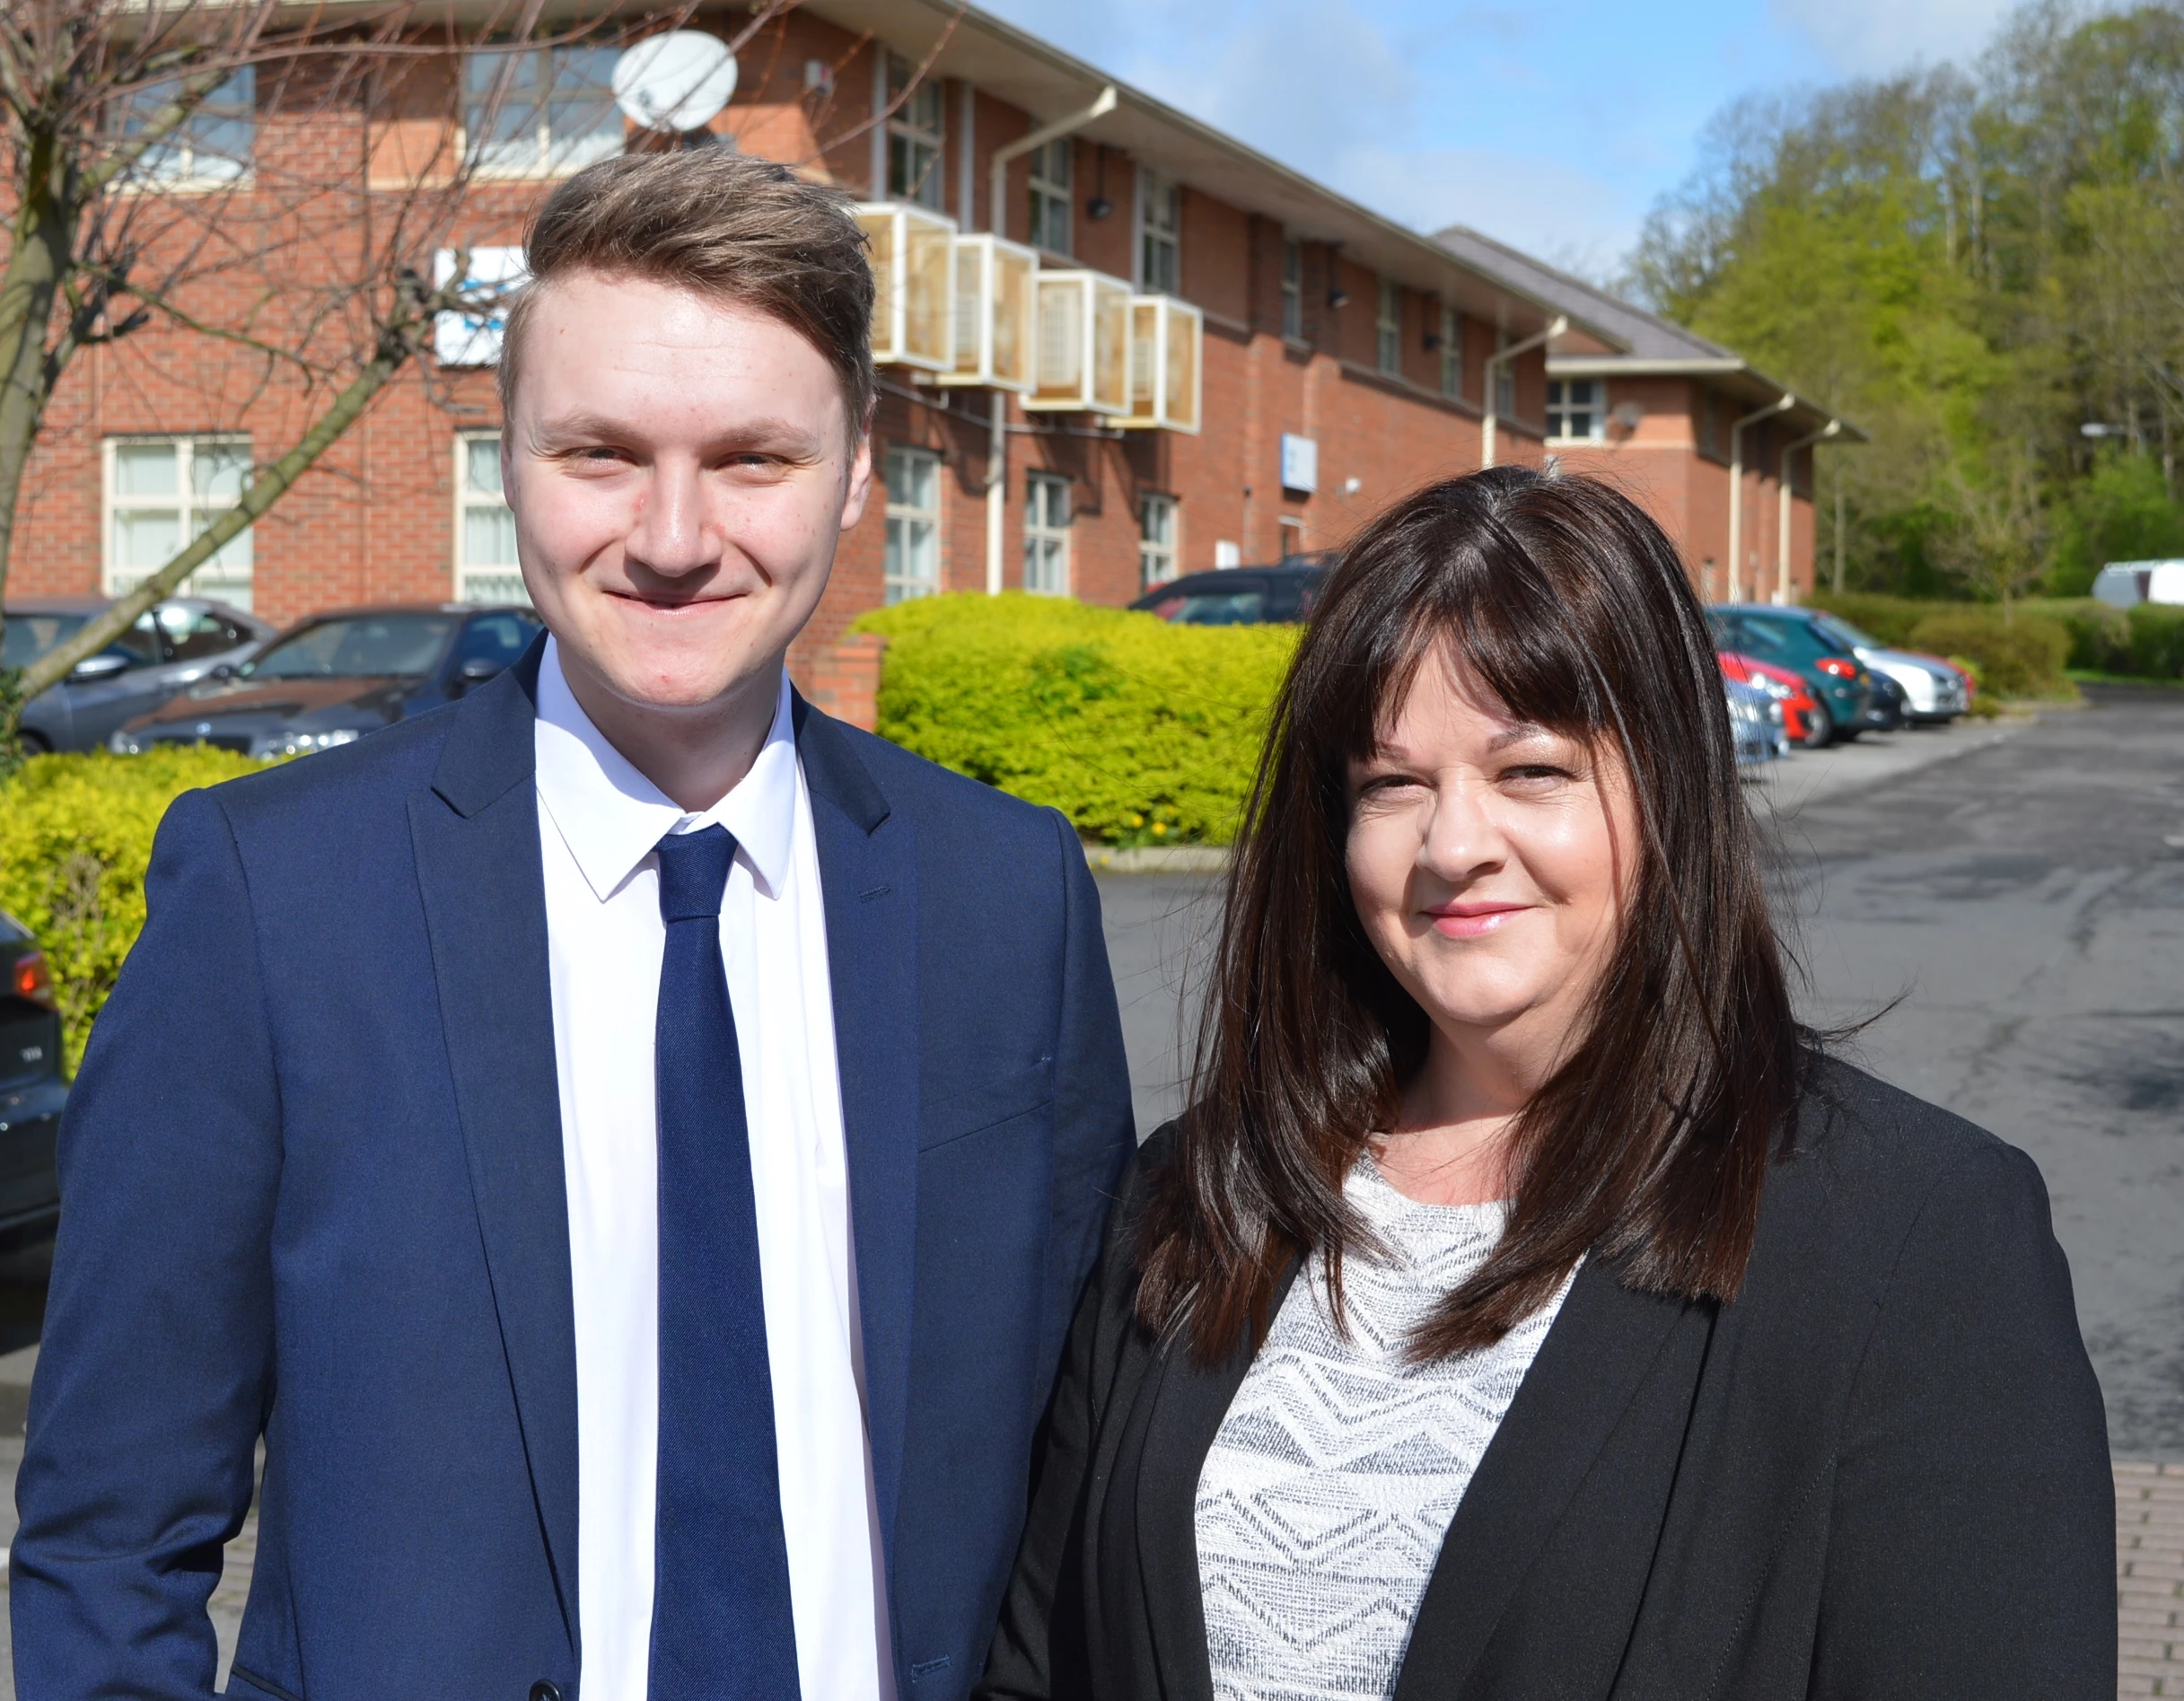 Milestone Financial Planning has strengthened its team further with two new recruits - Joanne Taylor and Jake Bennett.